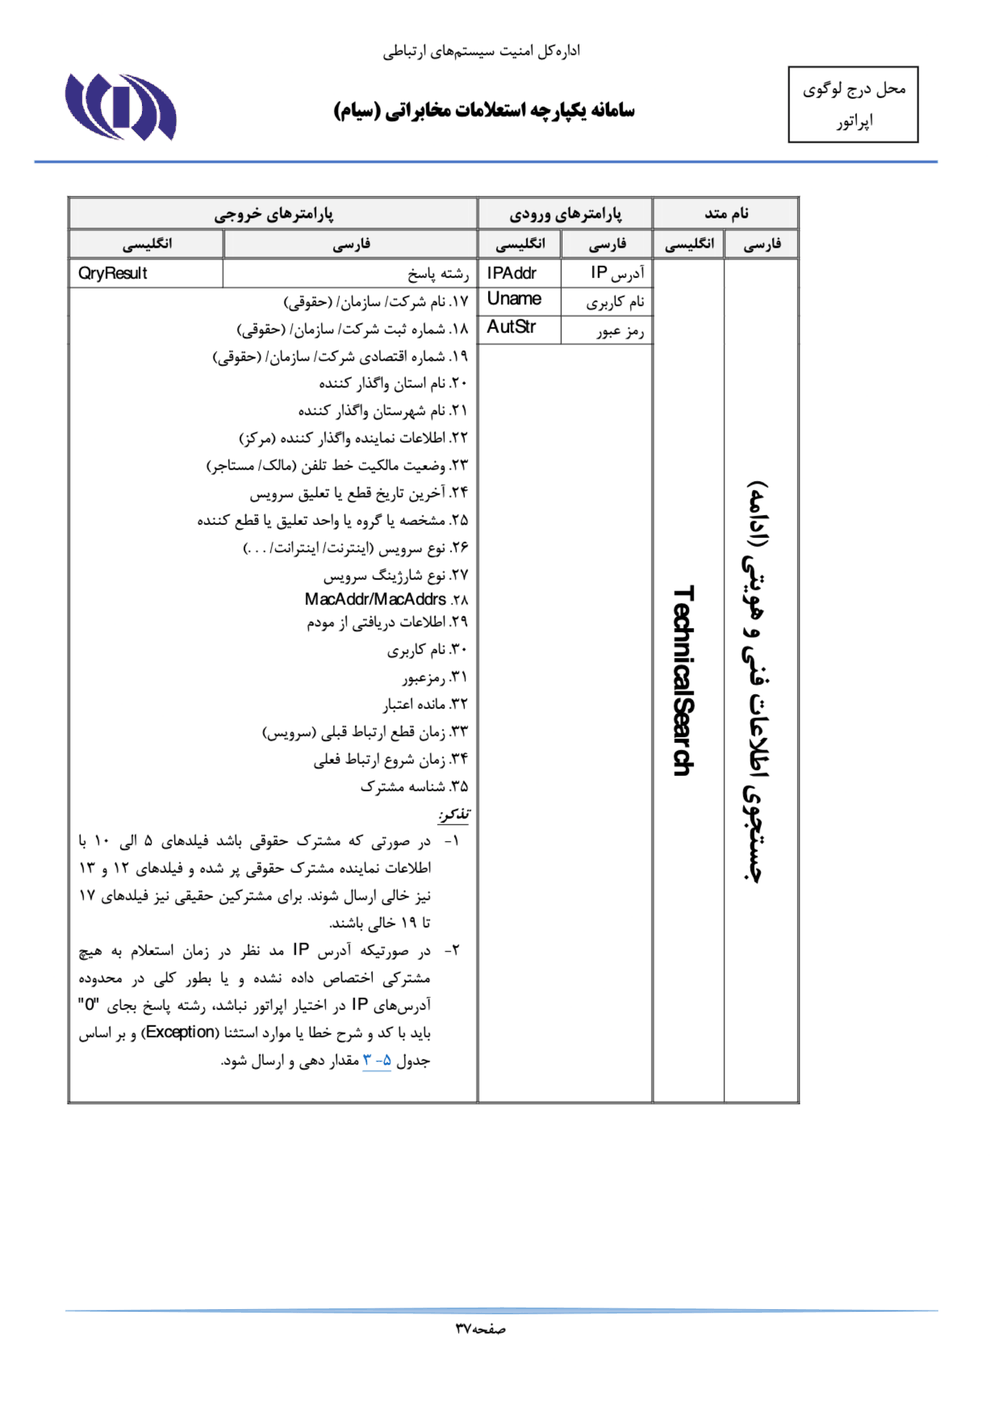 Page 37 from Iran’s SIAM Manual in Persian for Tracking and Controlling Mobile Phones